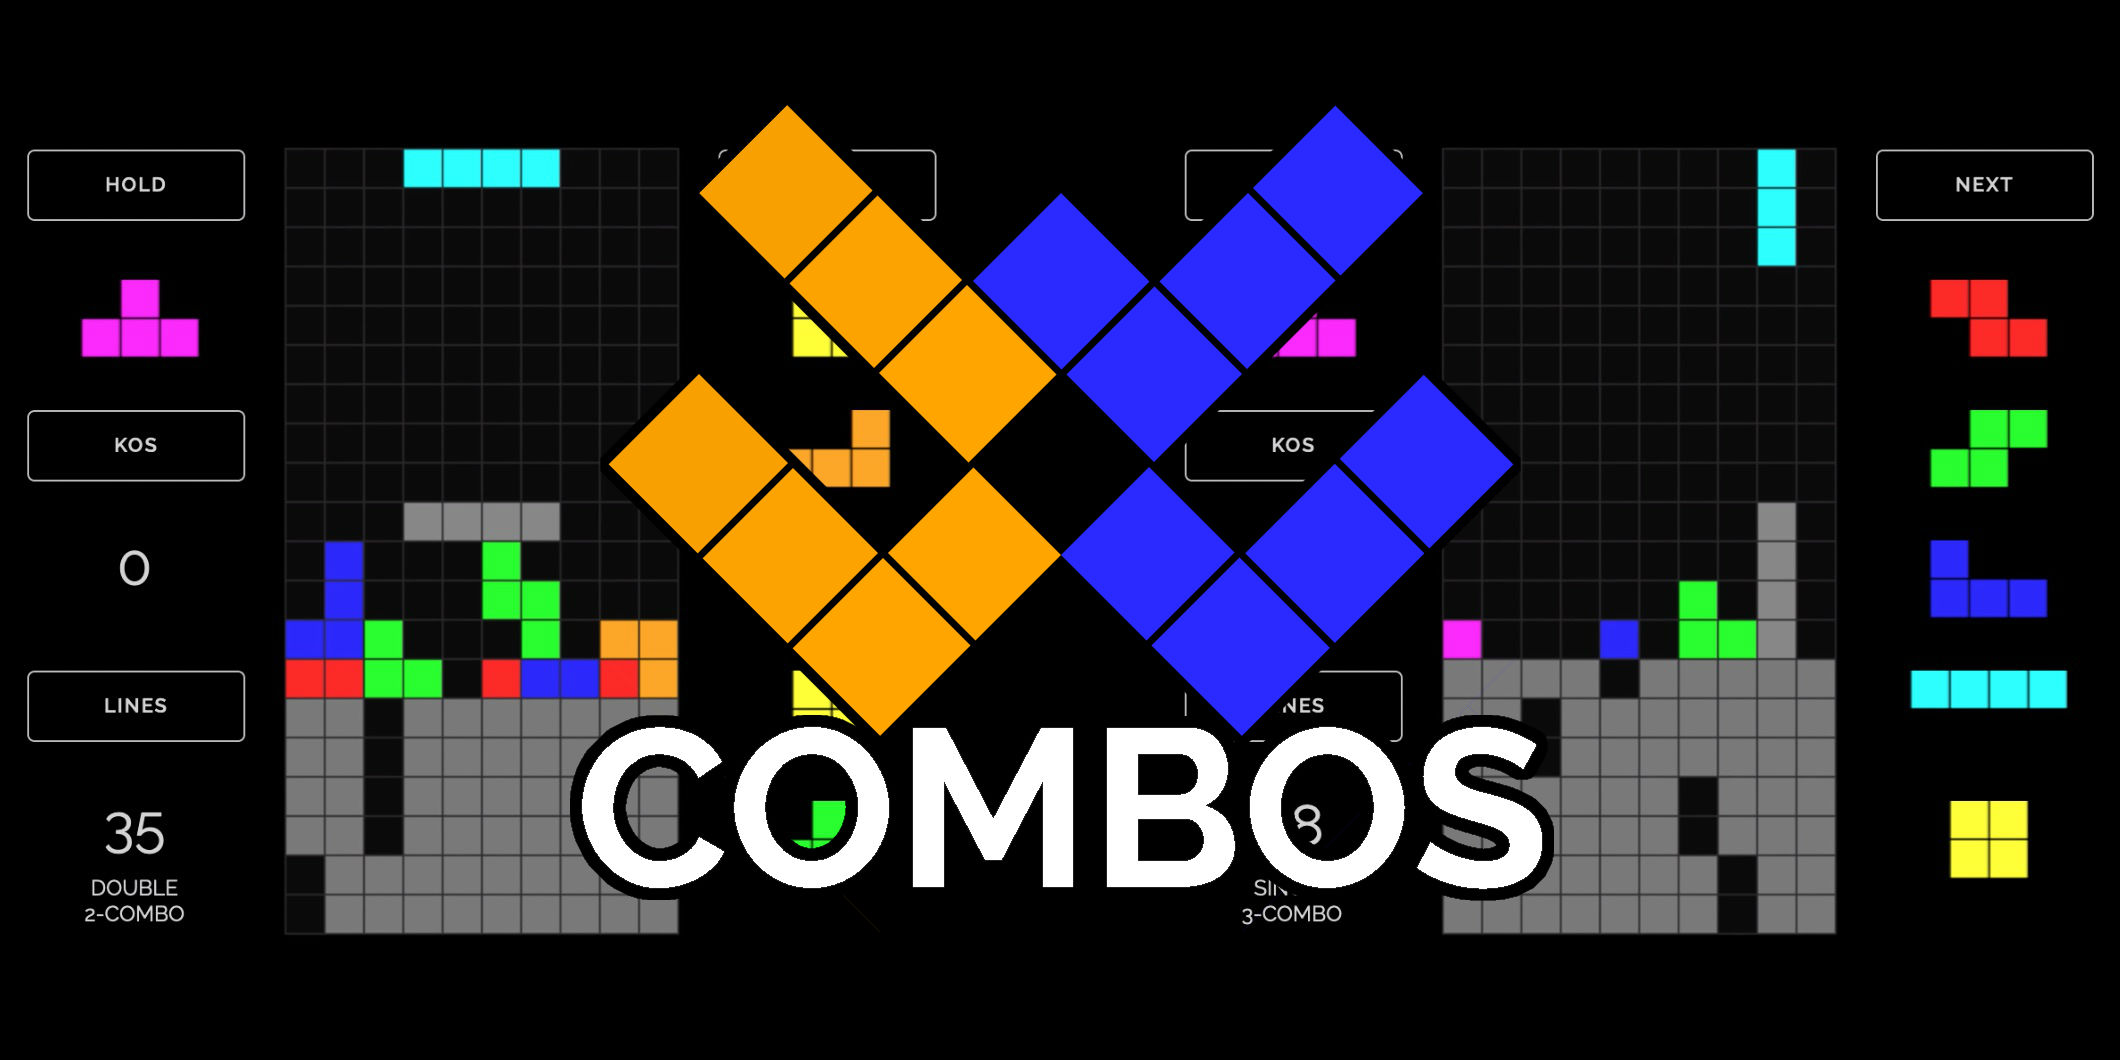 Worldwide Combos, free and competitive block-stacking game